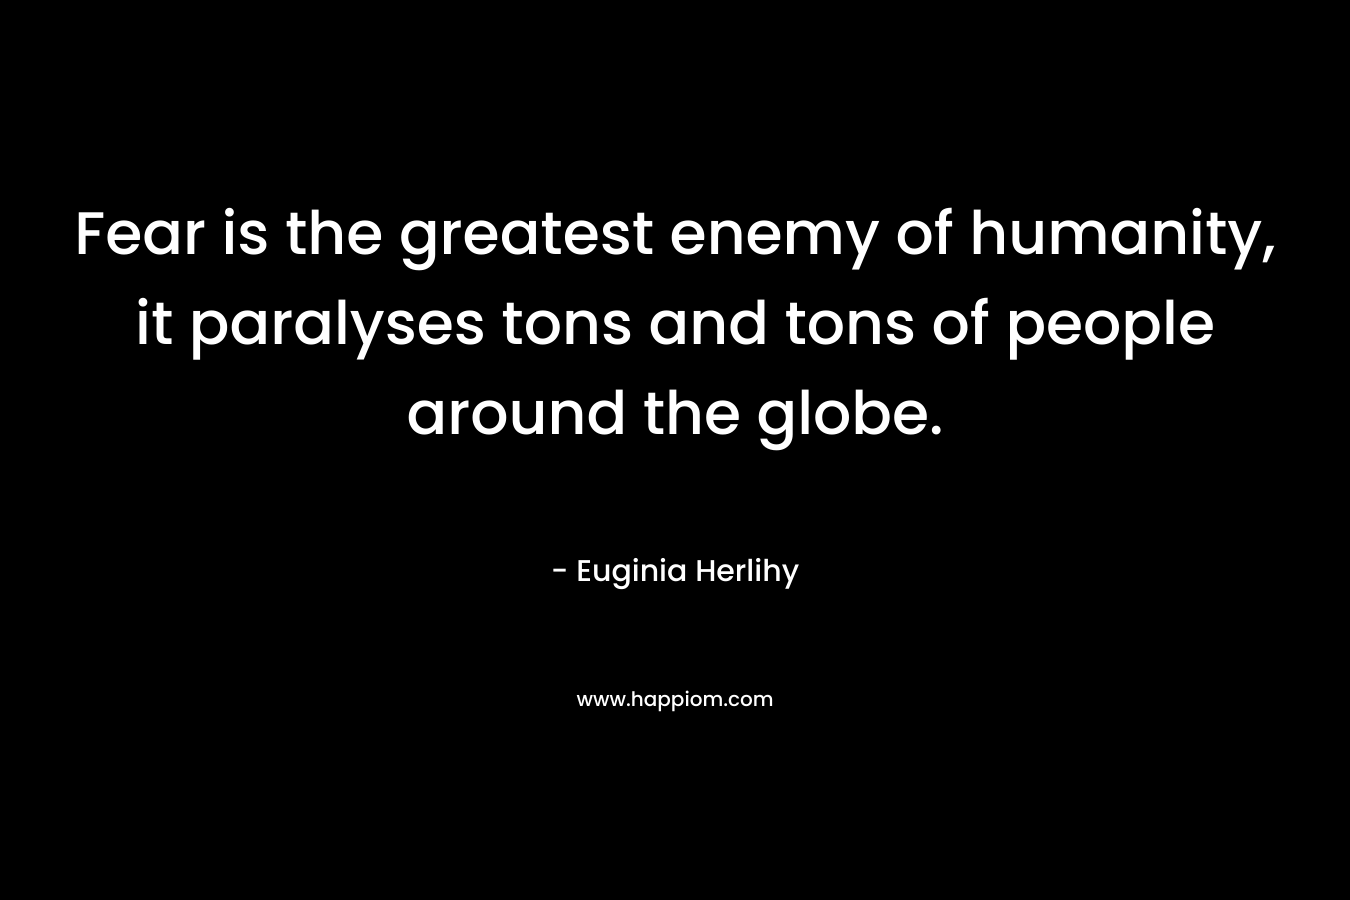 Fear is the greatest enemy of humanity, it paralyses tons and tons of people around the globe. – Euginia Herlihy